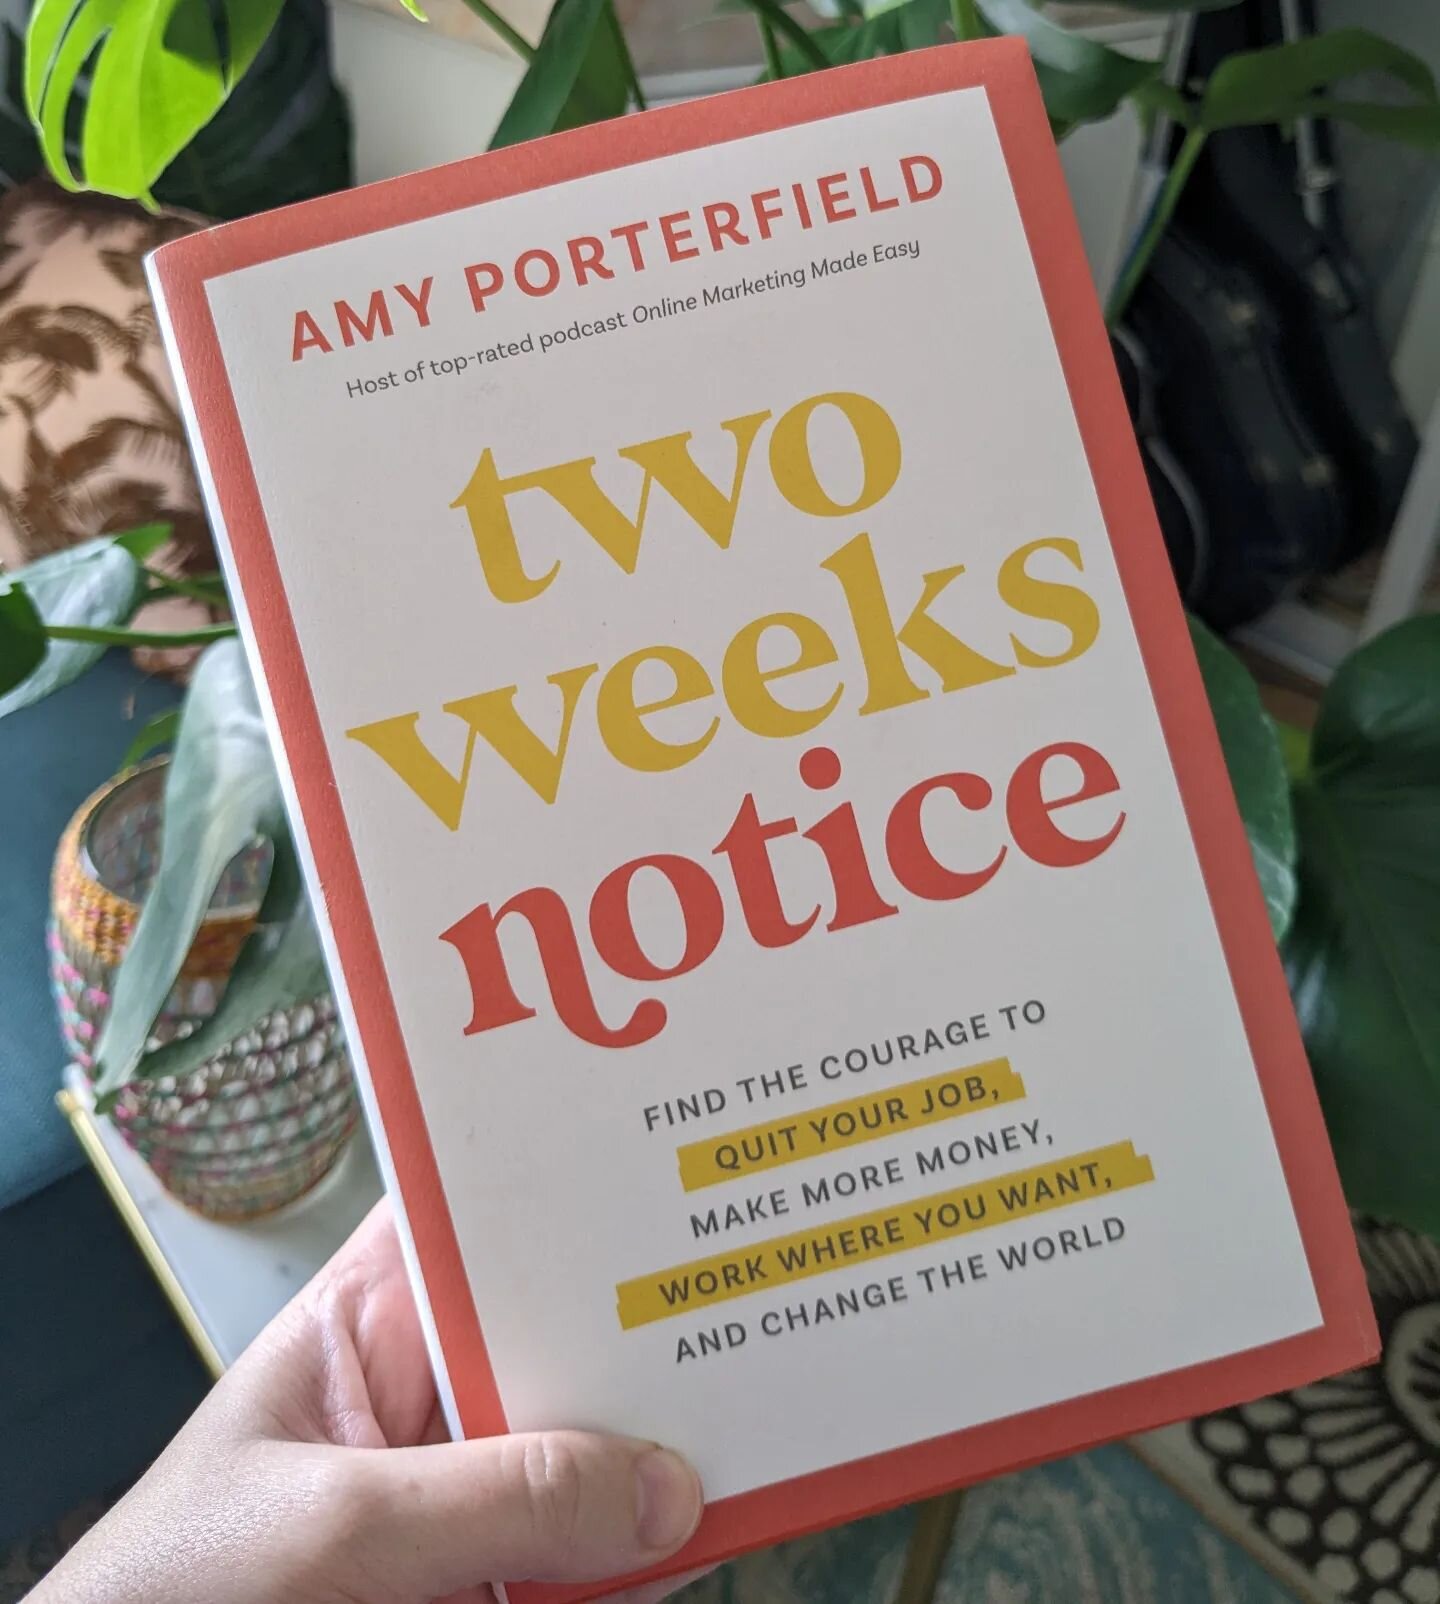 I cannot believe I was on @amyporterfield 's podcast - Online Marketing Made Easy! 🤩

For real... 
I had the amazing privilege of reviewing Amy Porterfield's new book 📖 Two Weeks Notice on her podcast!!! Me 👈 I know! Crazy! 🤯

The episode number 